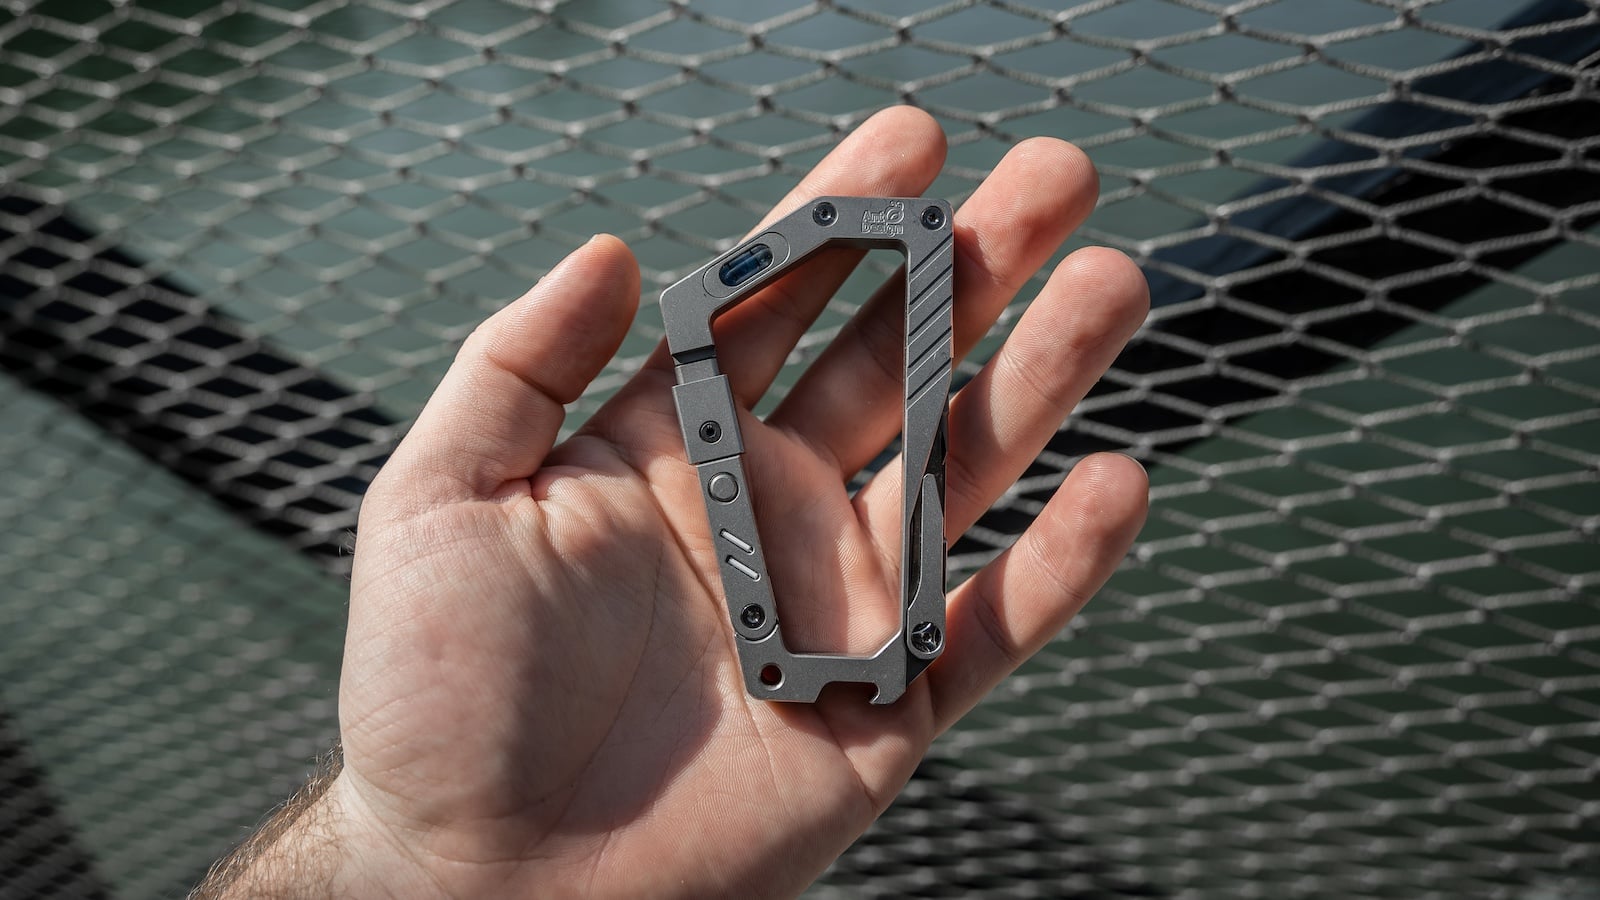 AntDesign GH Carabiner is ideal for adventurers with its 17-in-1 functionality